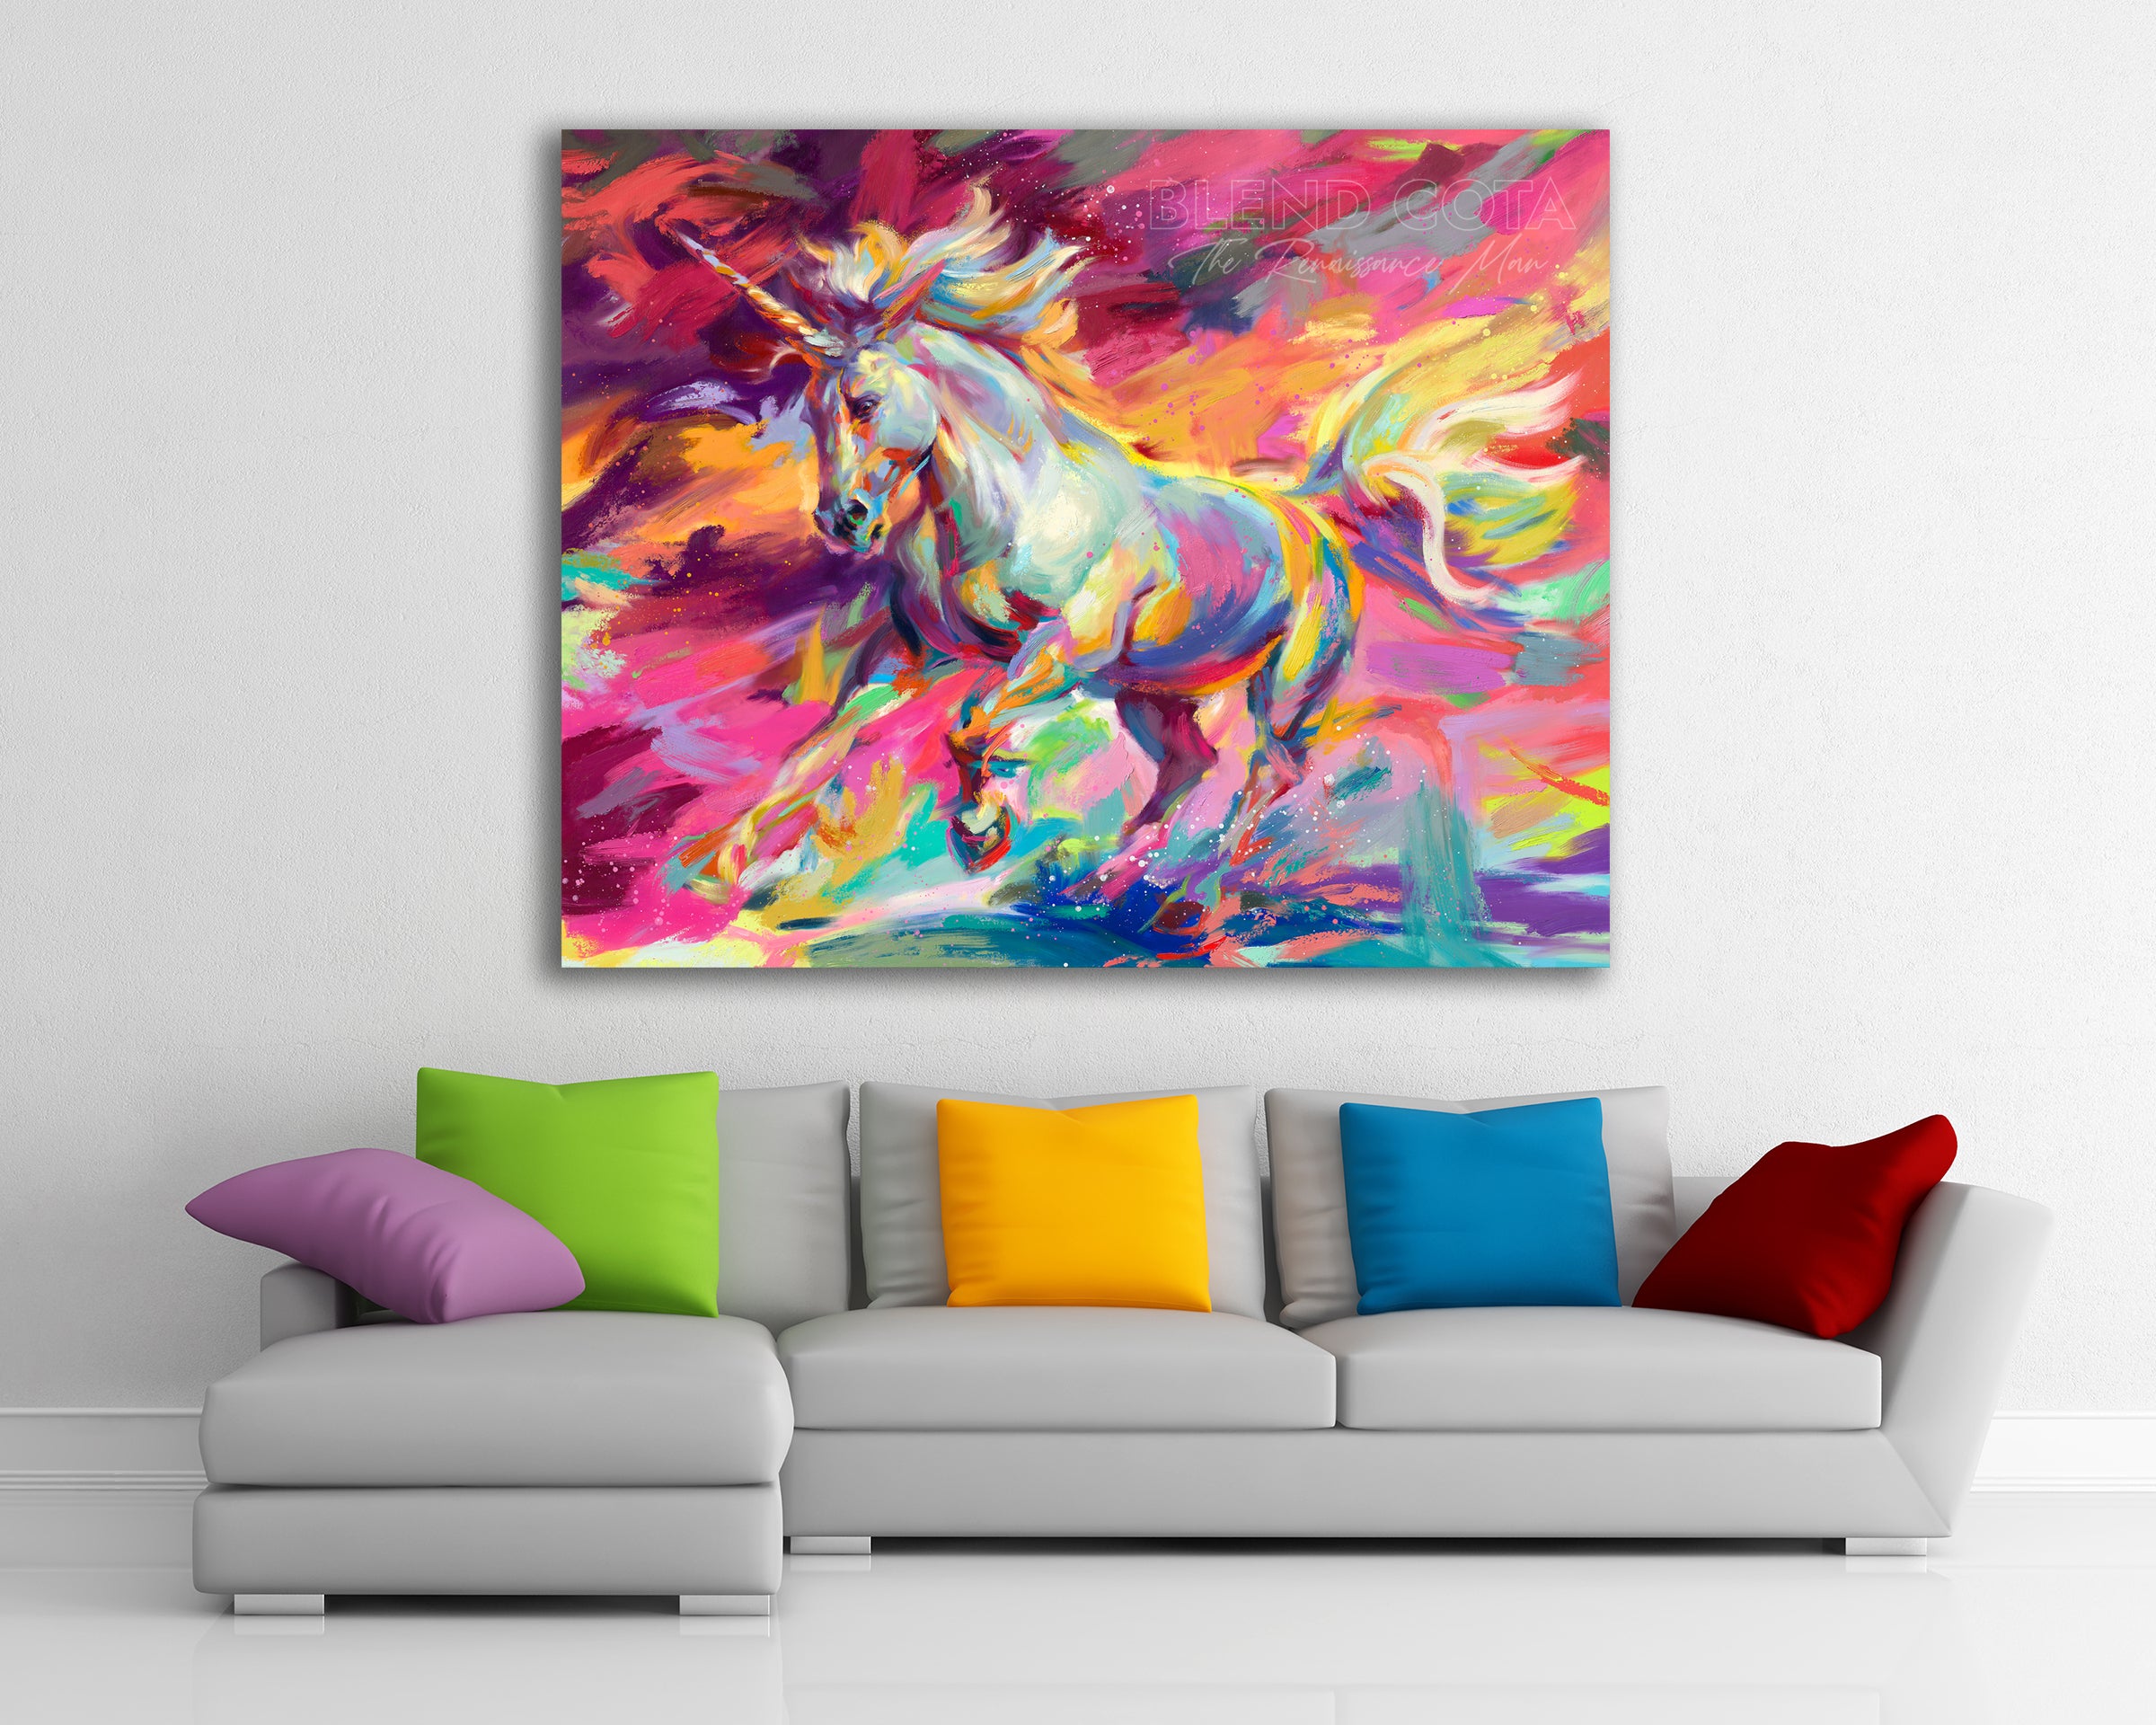 Unicorn - Blend Cota Limited Edition Art on Canvas - Blend Cota Studios painting hanging on a white wall behind a colorful couch